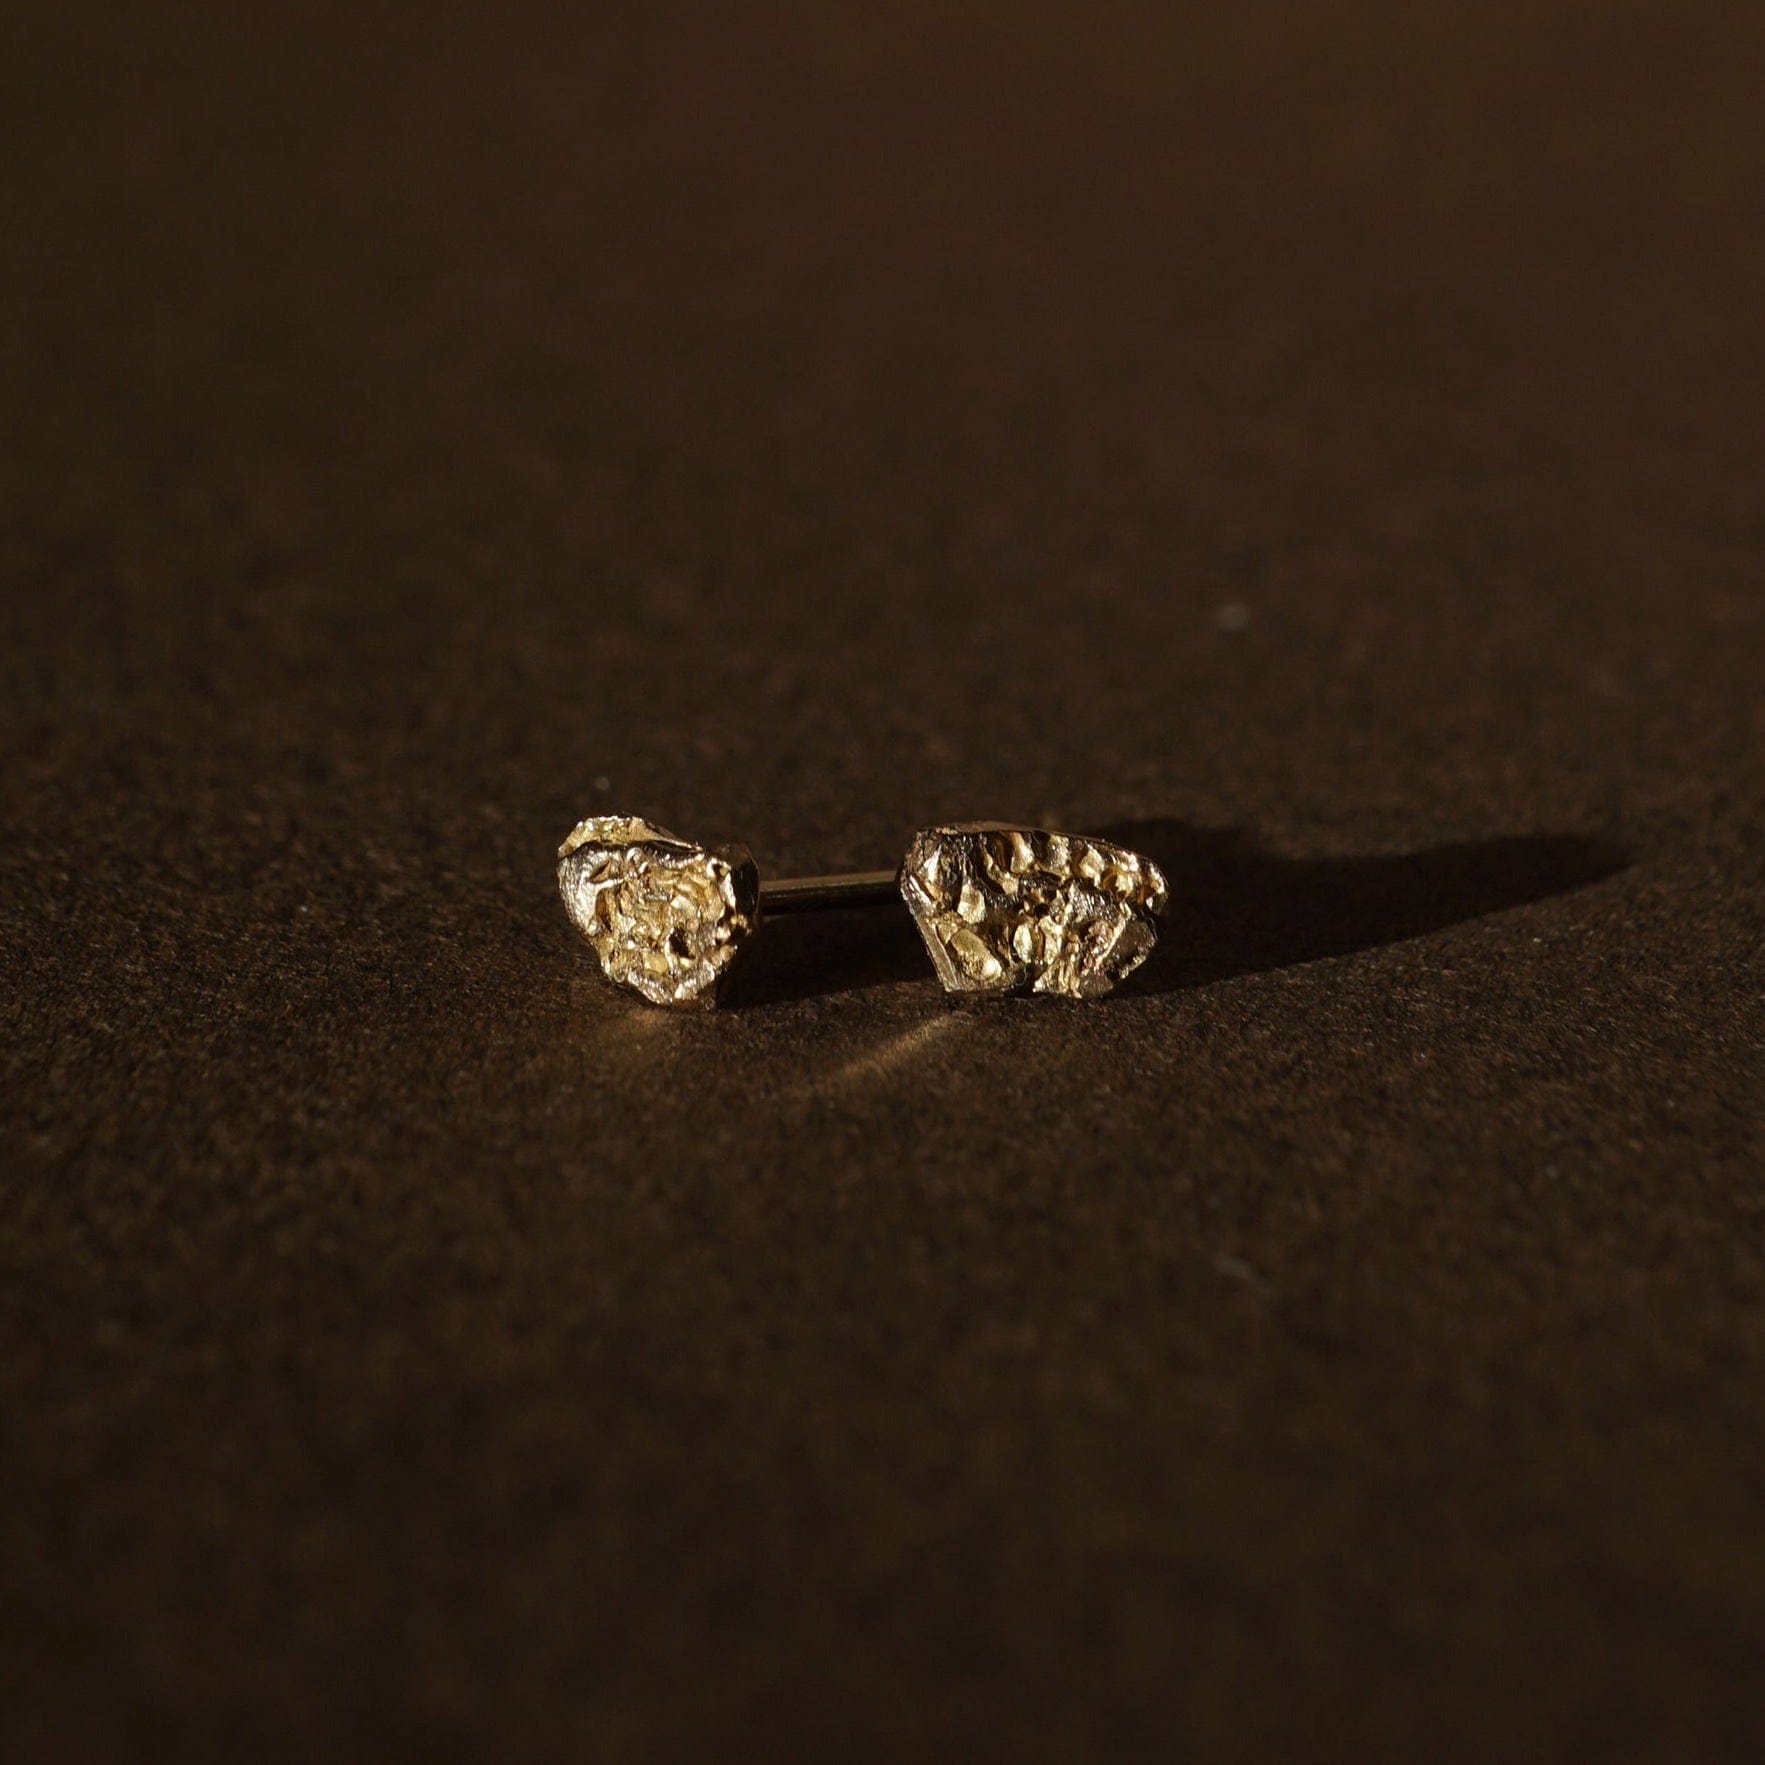 Science inspired stud earrings that look like asteroids. Made of 14K yellow gold. Textured and asymmetrical design. 